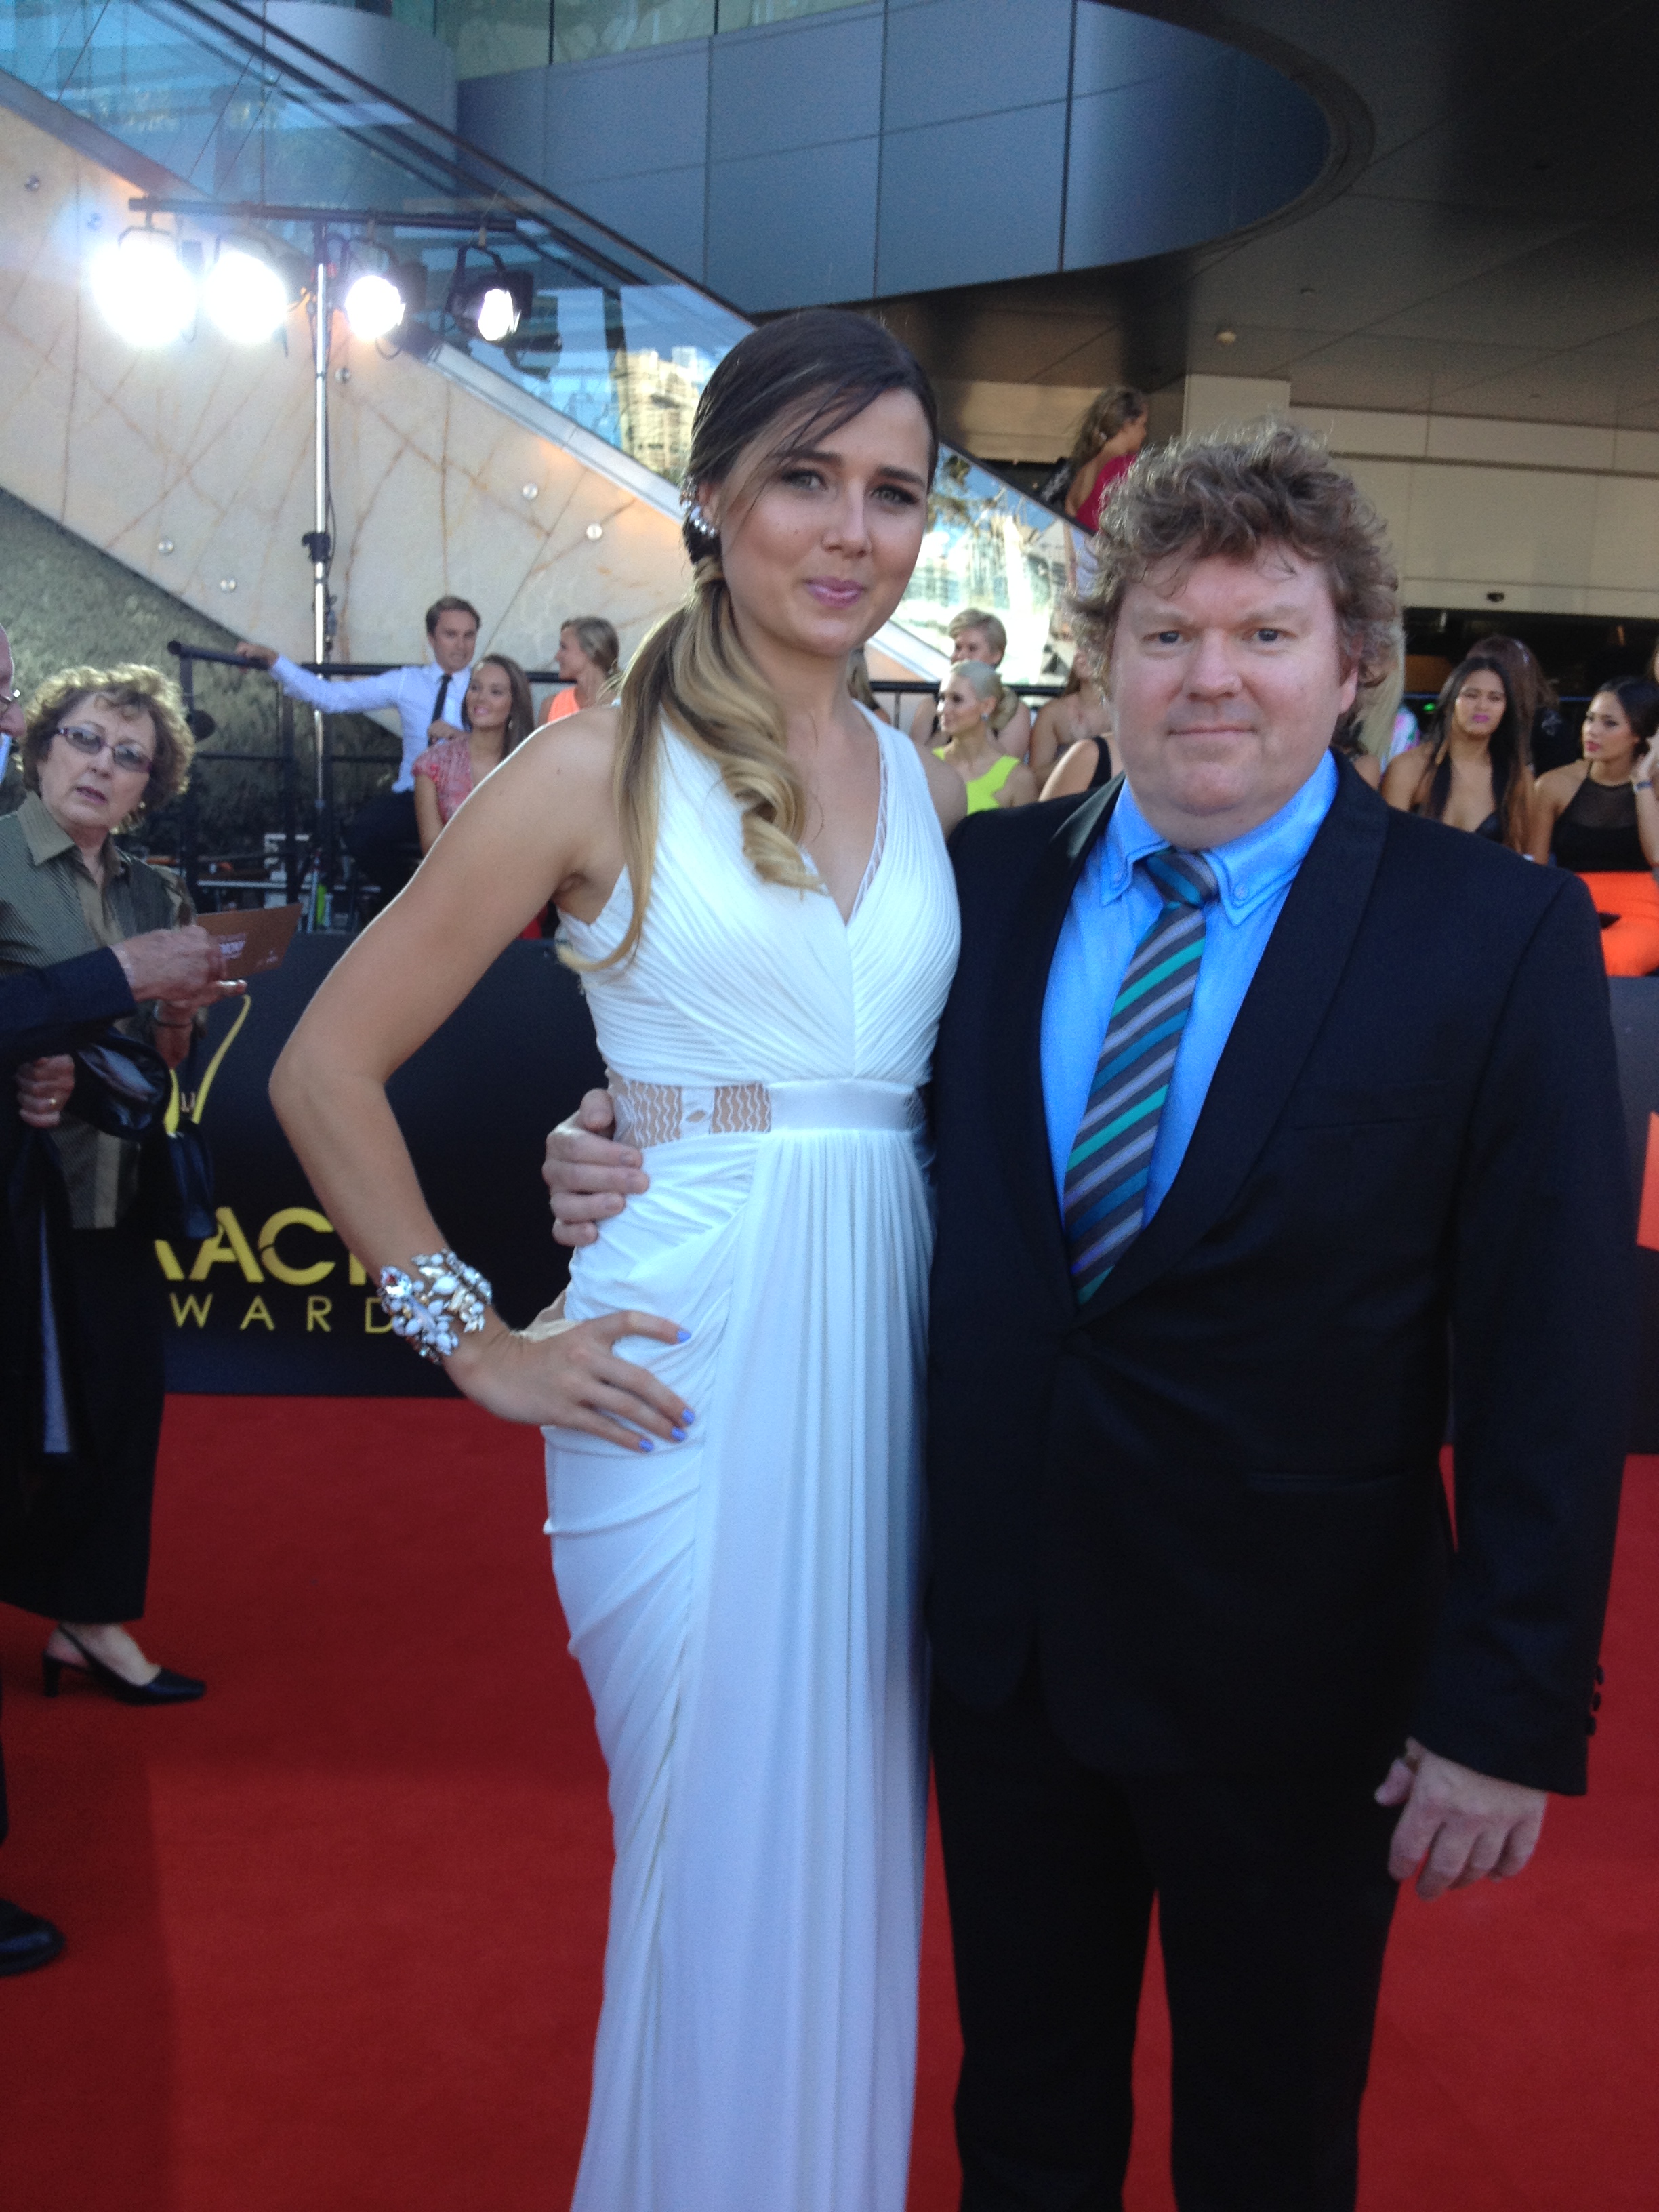 At the 2014 AACTA awards with my good mate, and client Stephen Hunter, star of the Hobbit series (as Bomber).